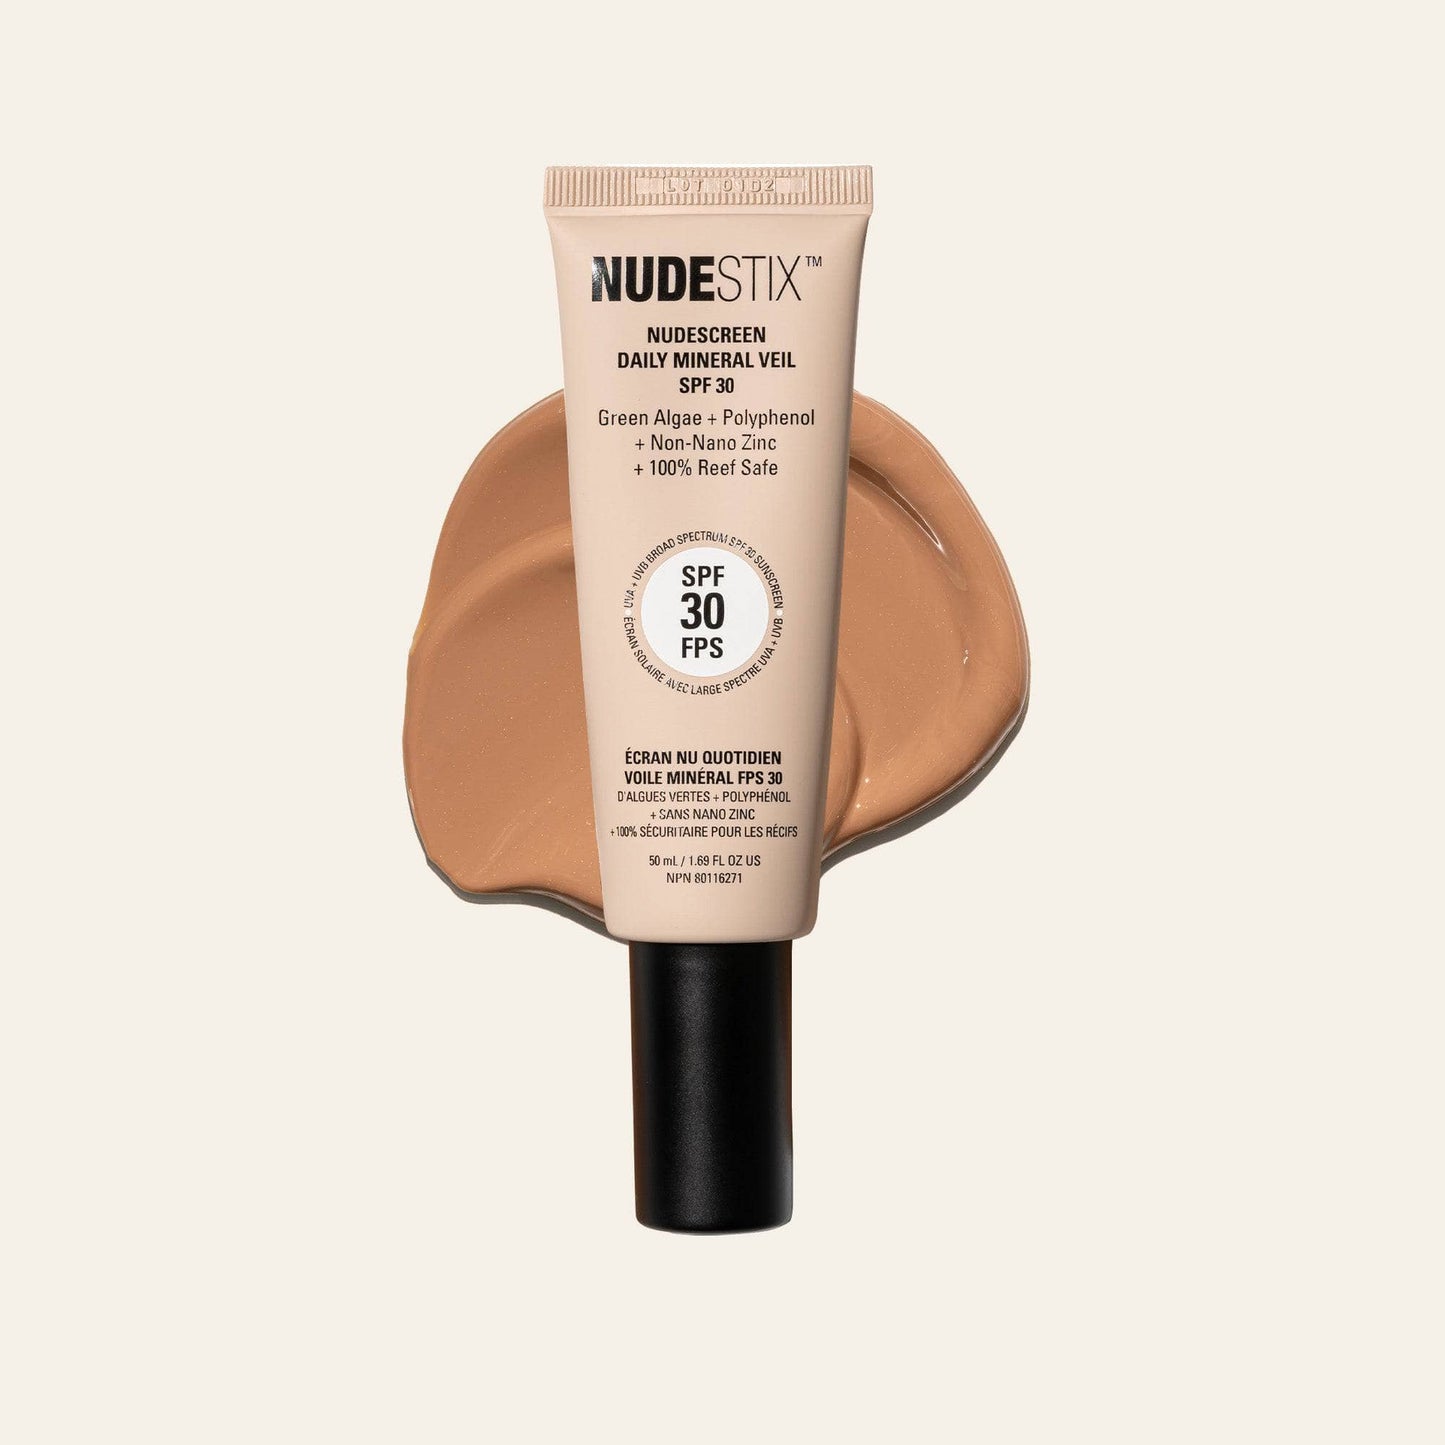 Nudescreen SPF Moisturizer in shade Tan with texture swatch